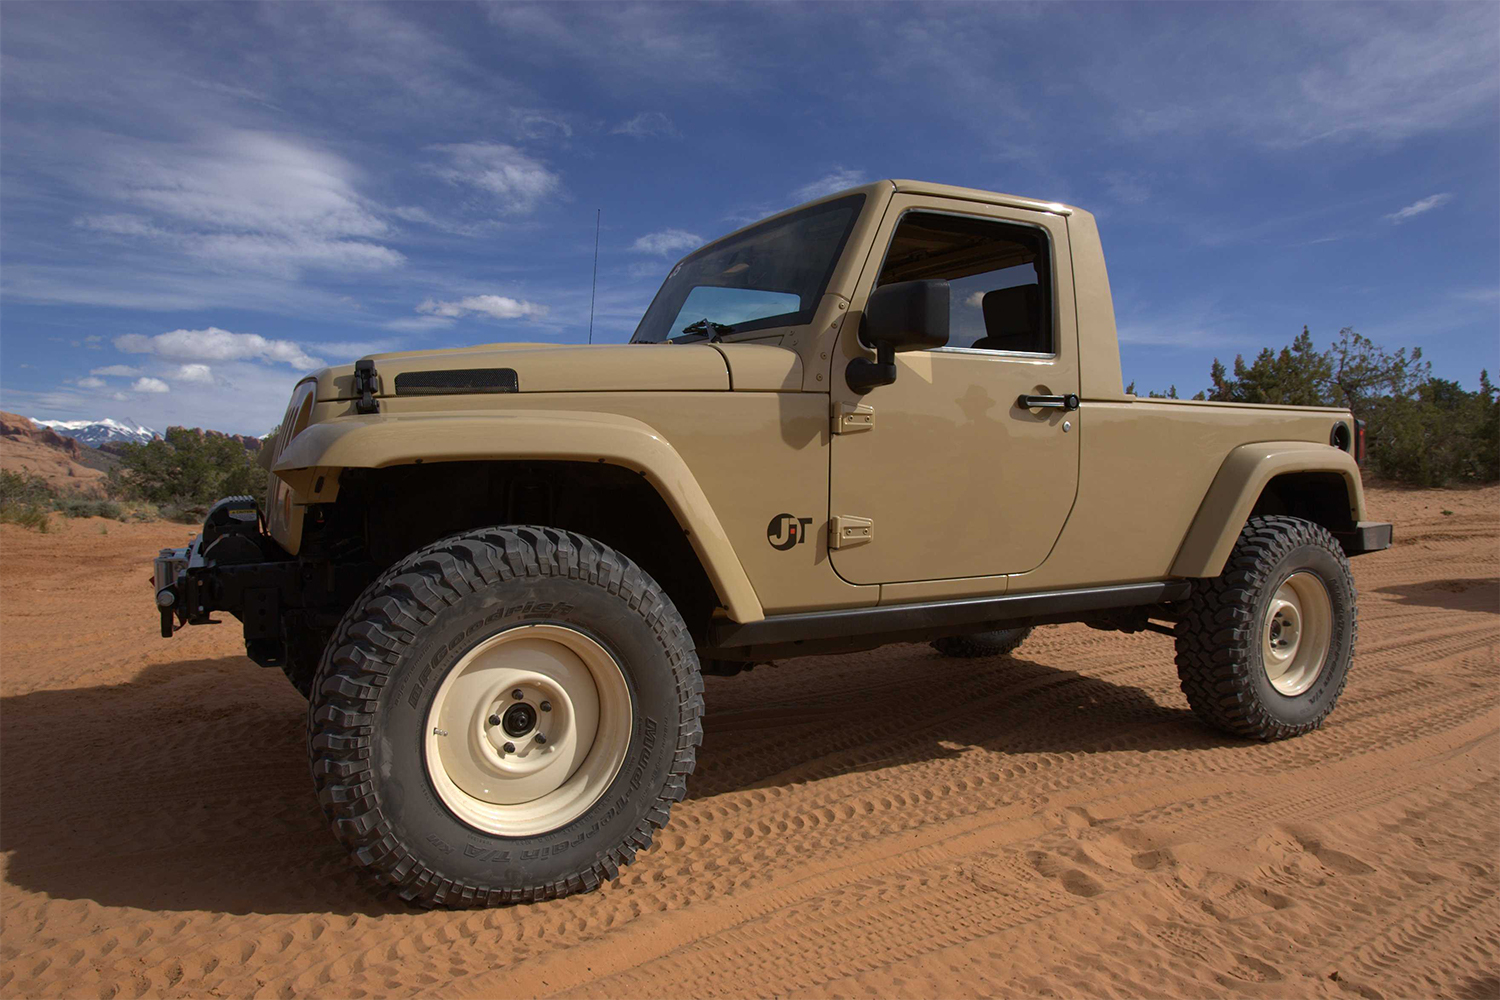 A beige two-door Jeep Wrangler truck in the desert at the Easter Jeep Safari